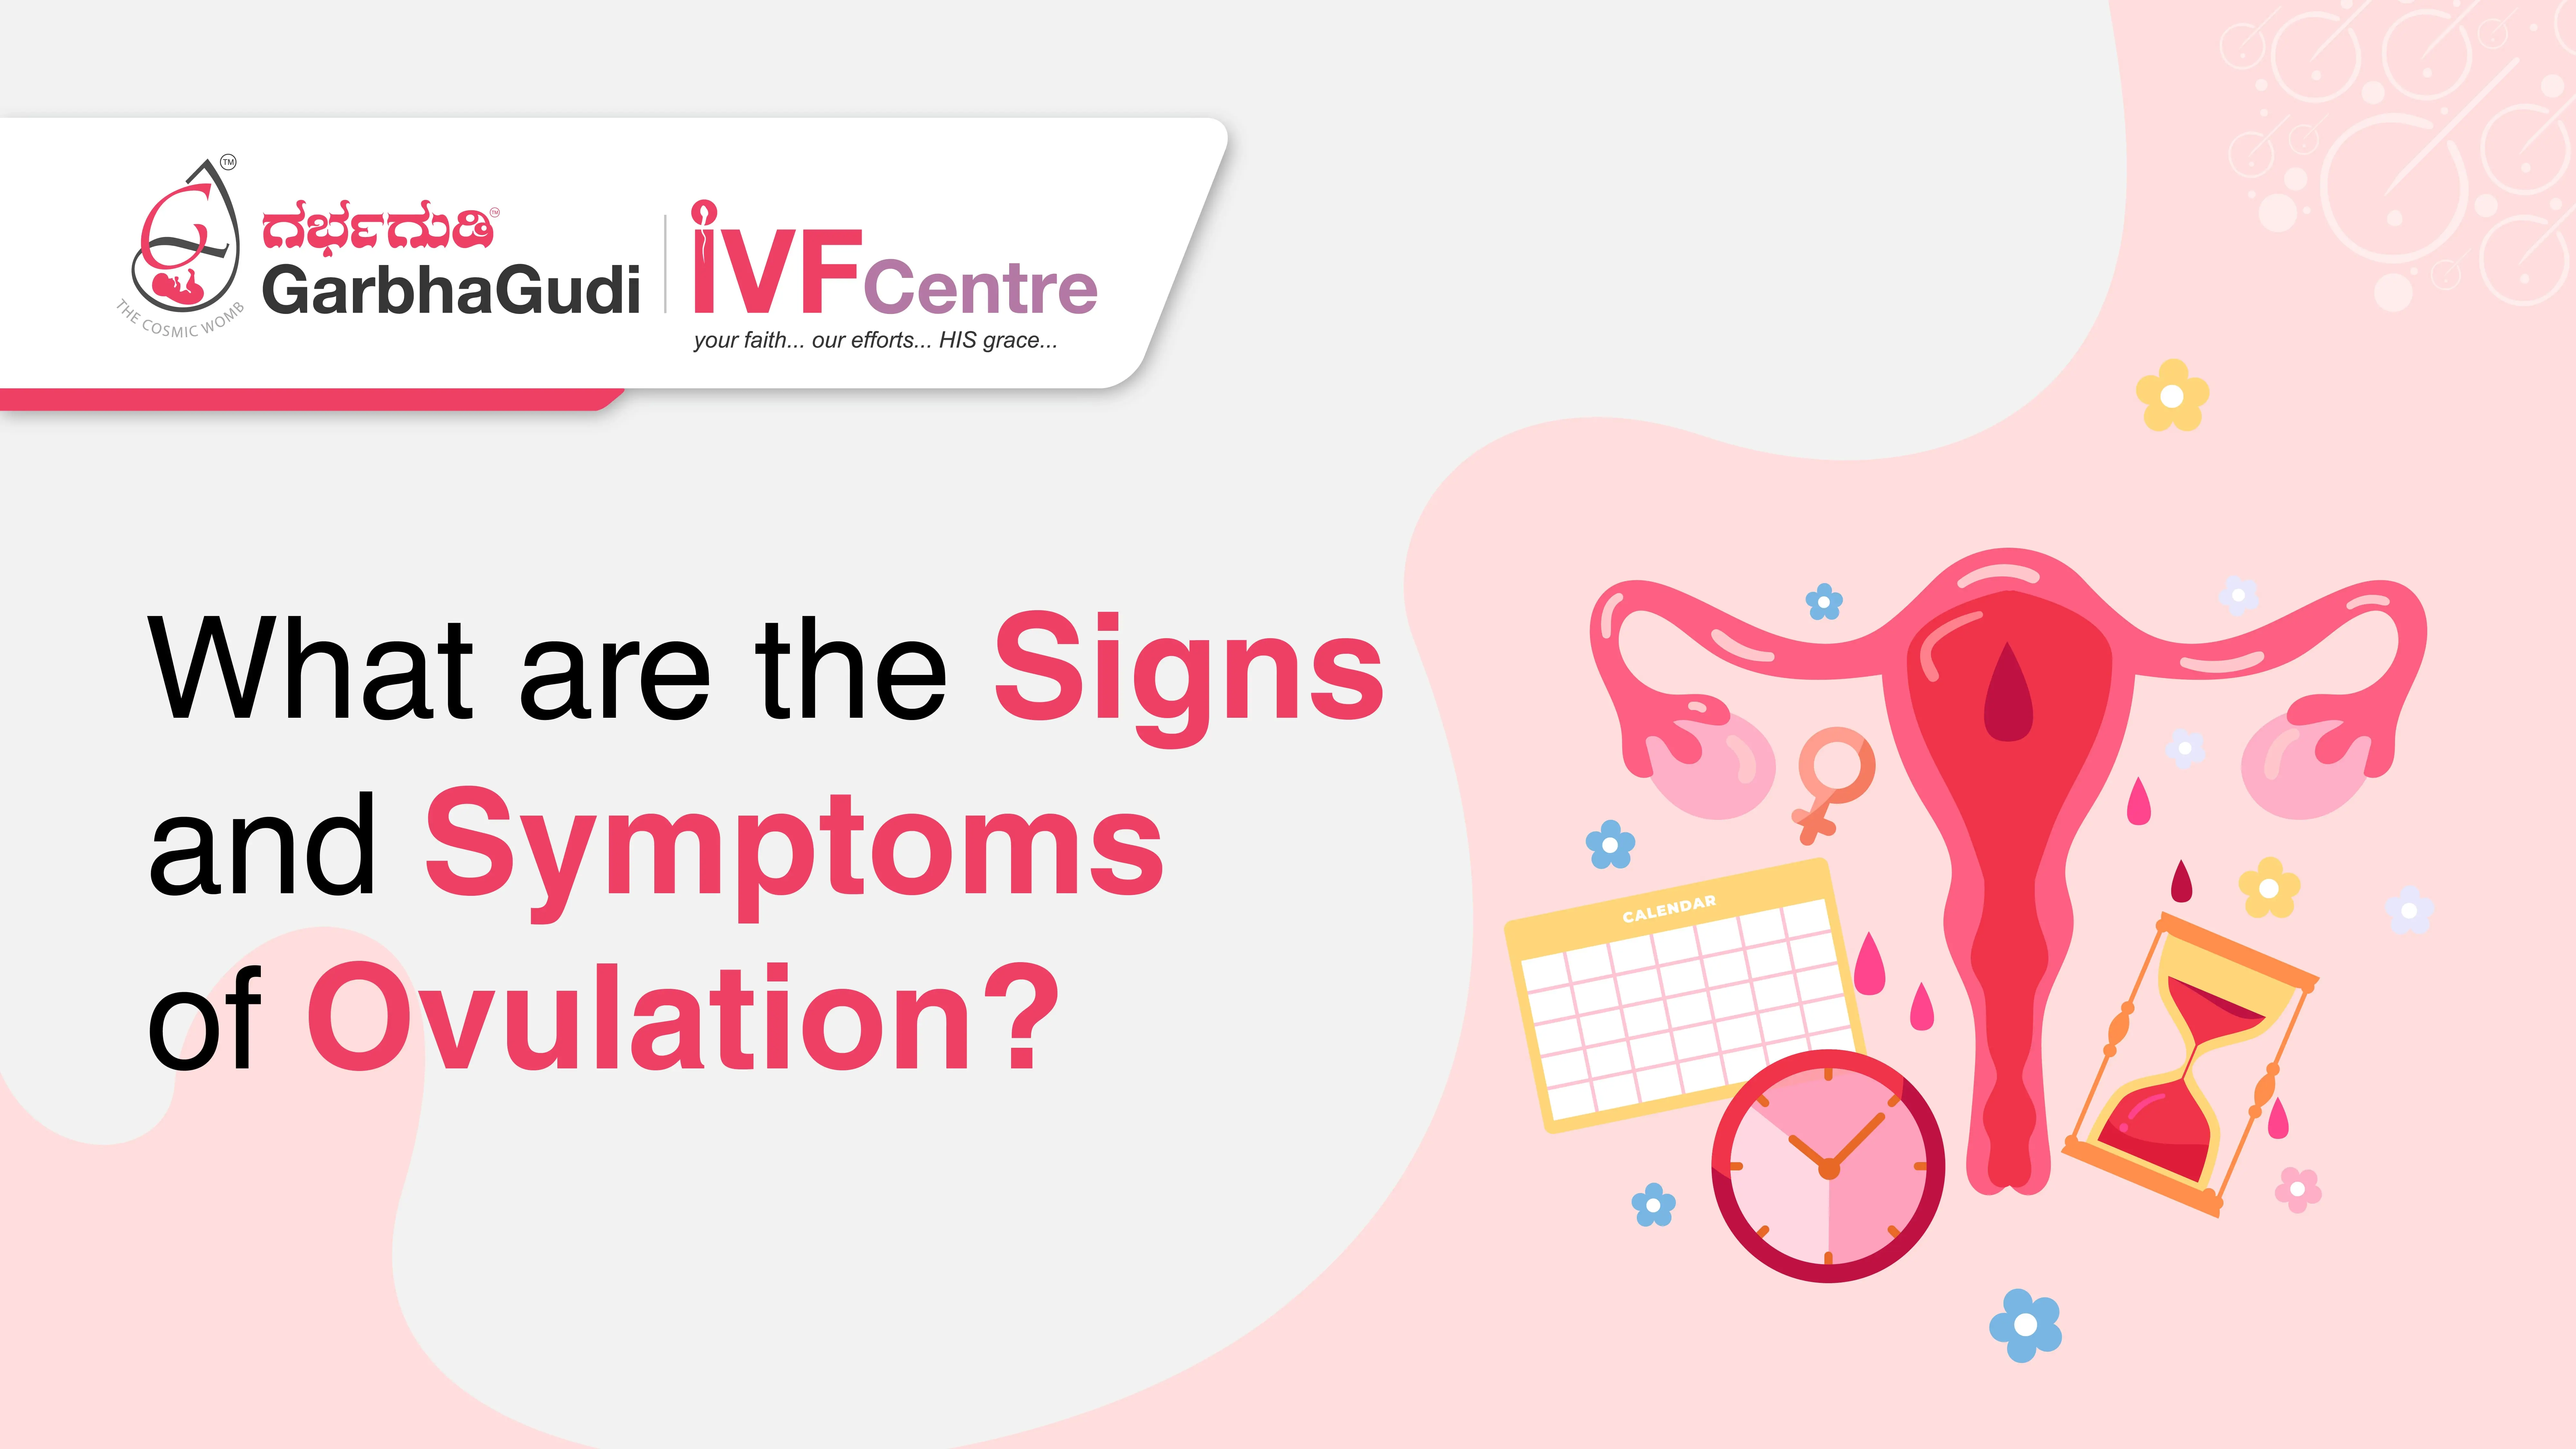 What are the Signs and Symptoms of Ovulation?